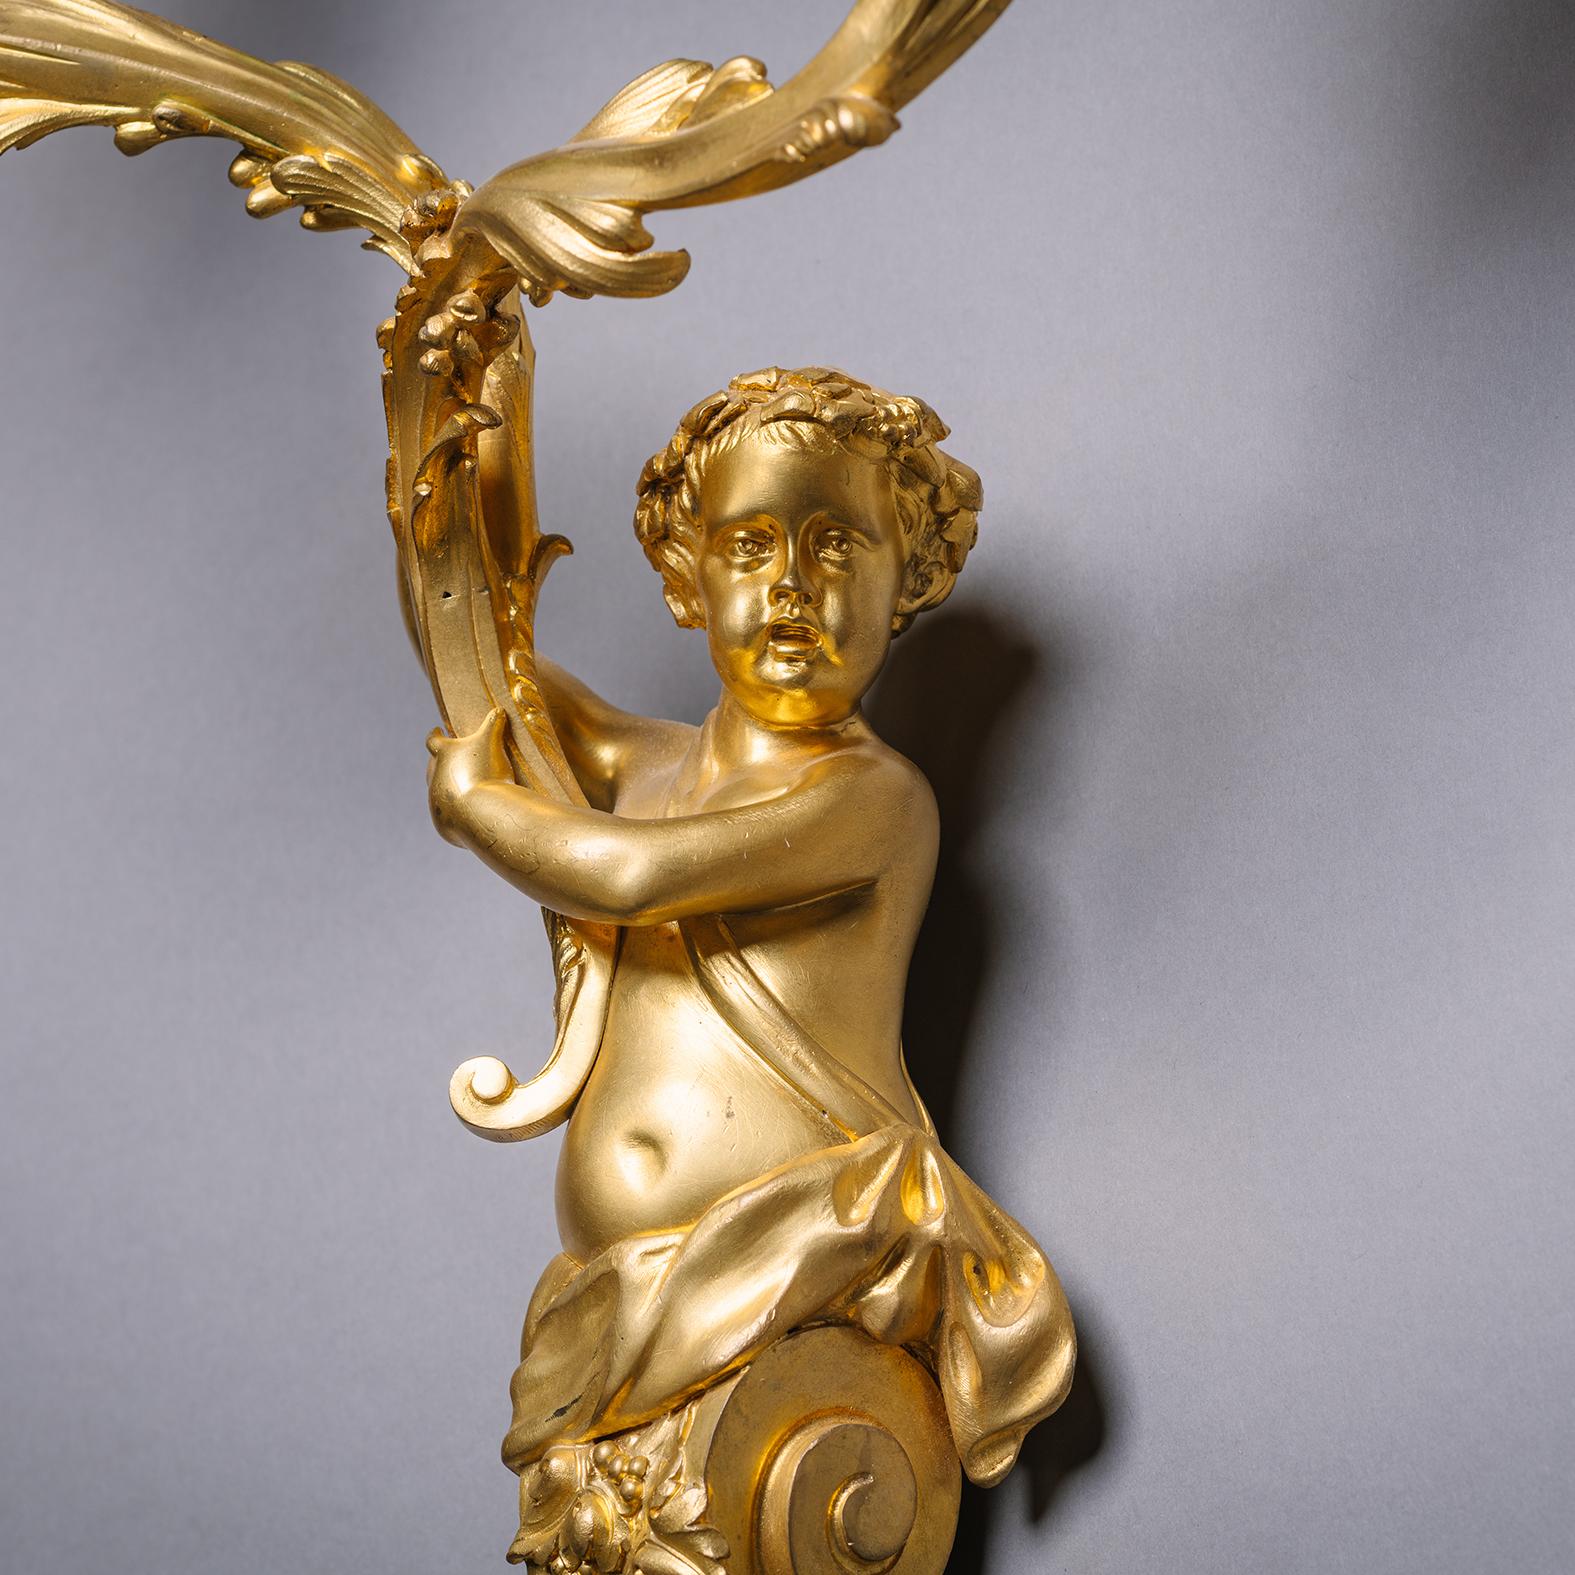 A Pair of Louis XIV Style Gilt-Bronze Twin-Light Wall-Appliques Modelled With Cherubic Herms. In the Manner of André-Charles Boulle.

Each modelled as a cherubic herm holding aloft acanthus branches. Wired for electricity.

France, Circa 1860.